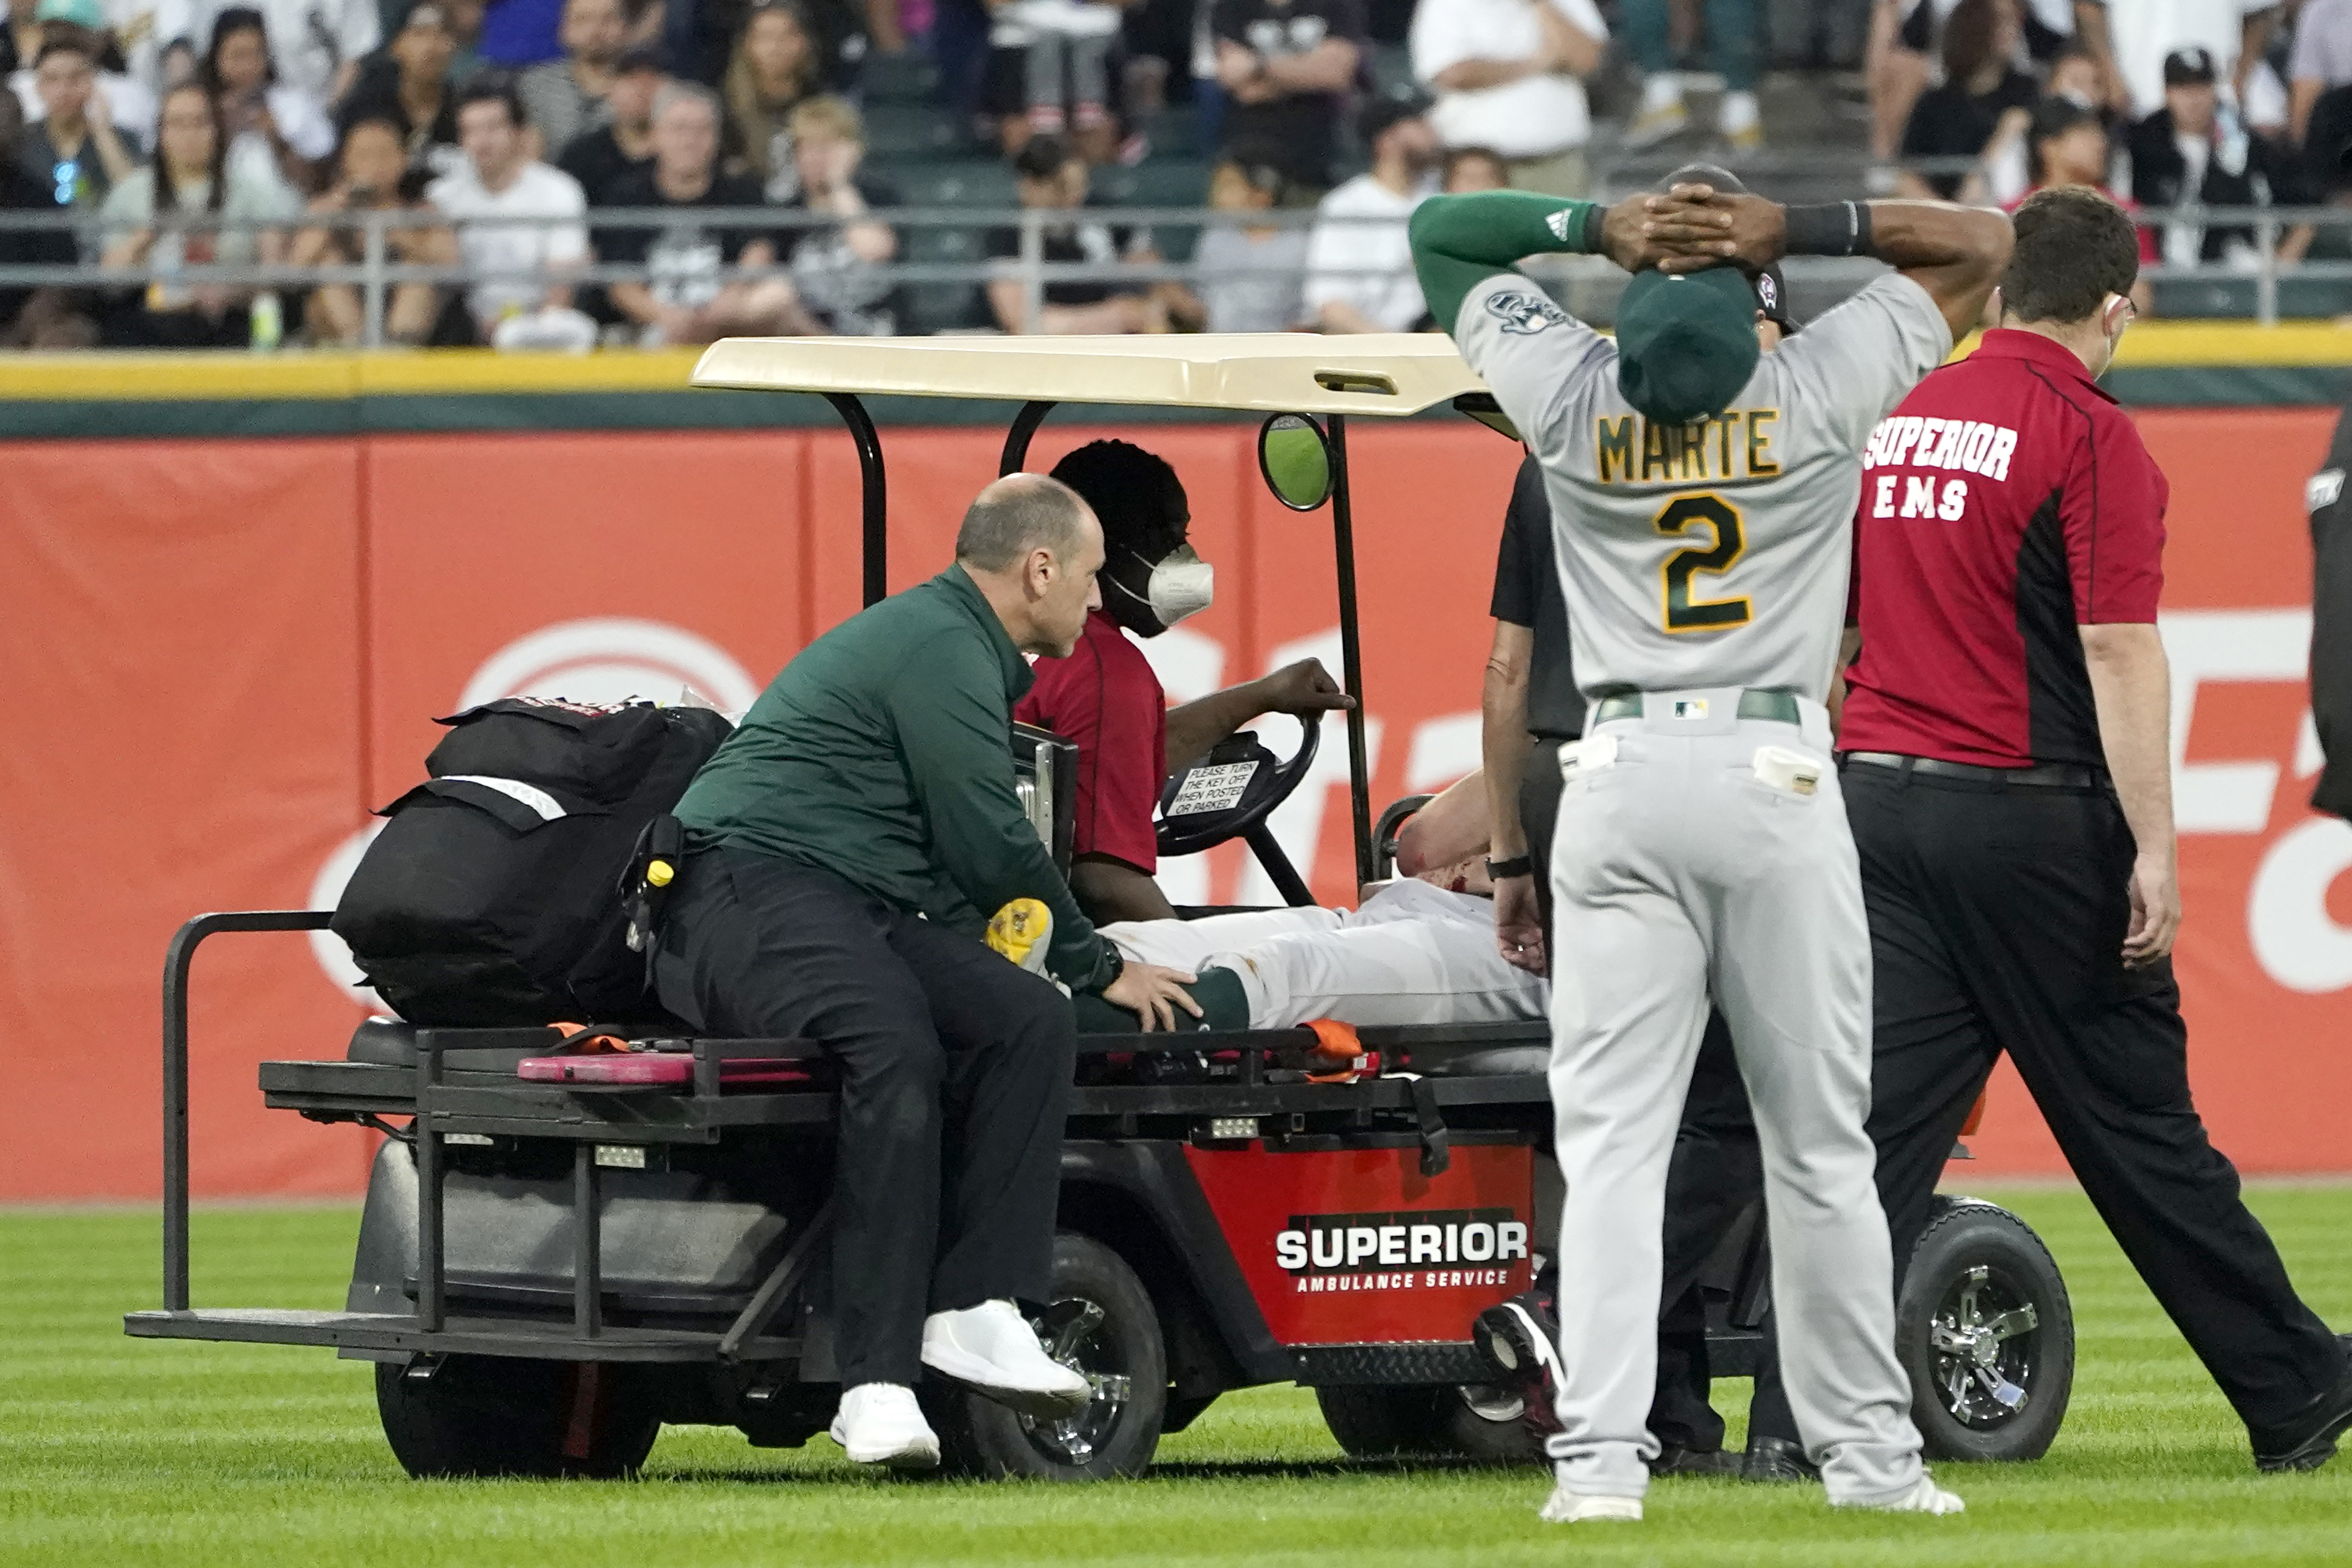 Bassitt struck by liner, Athletics lose 9-0 to White Sox - The San